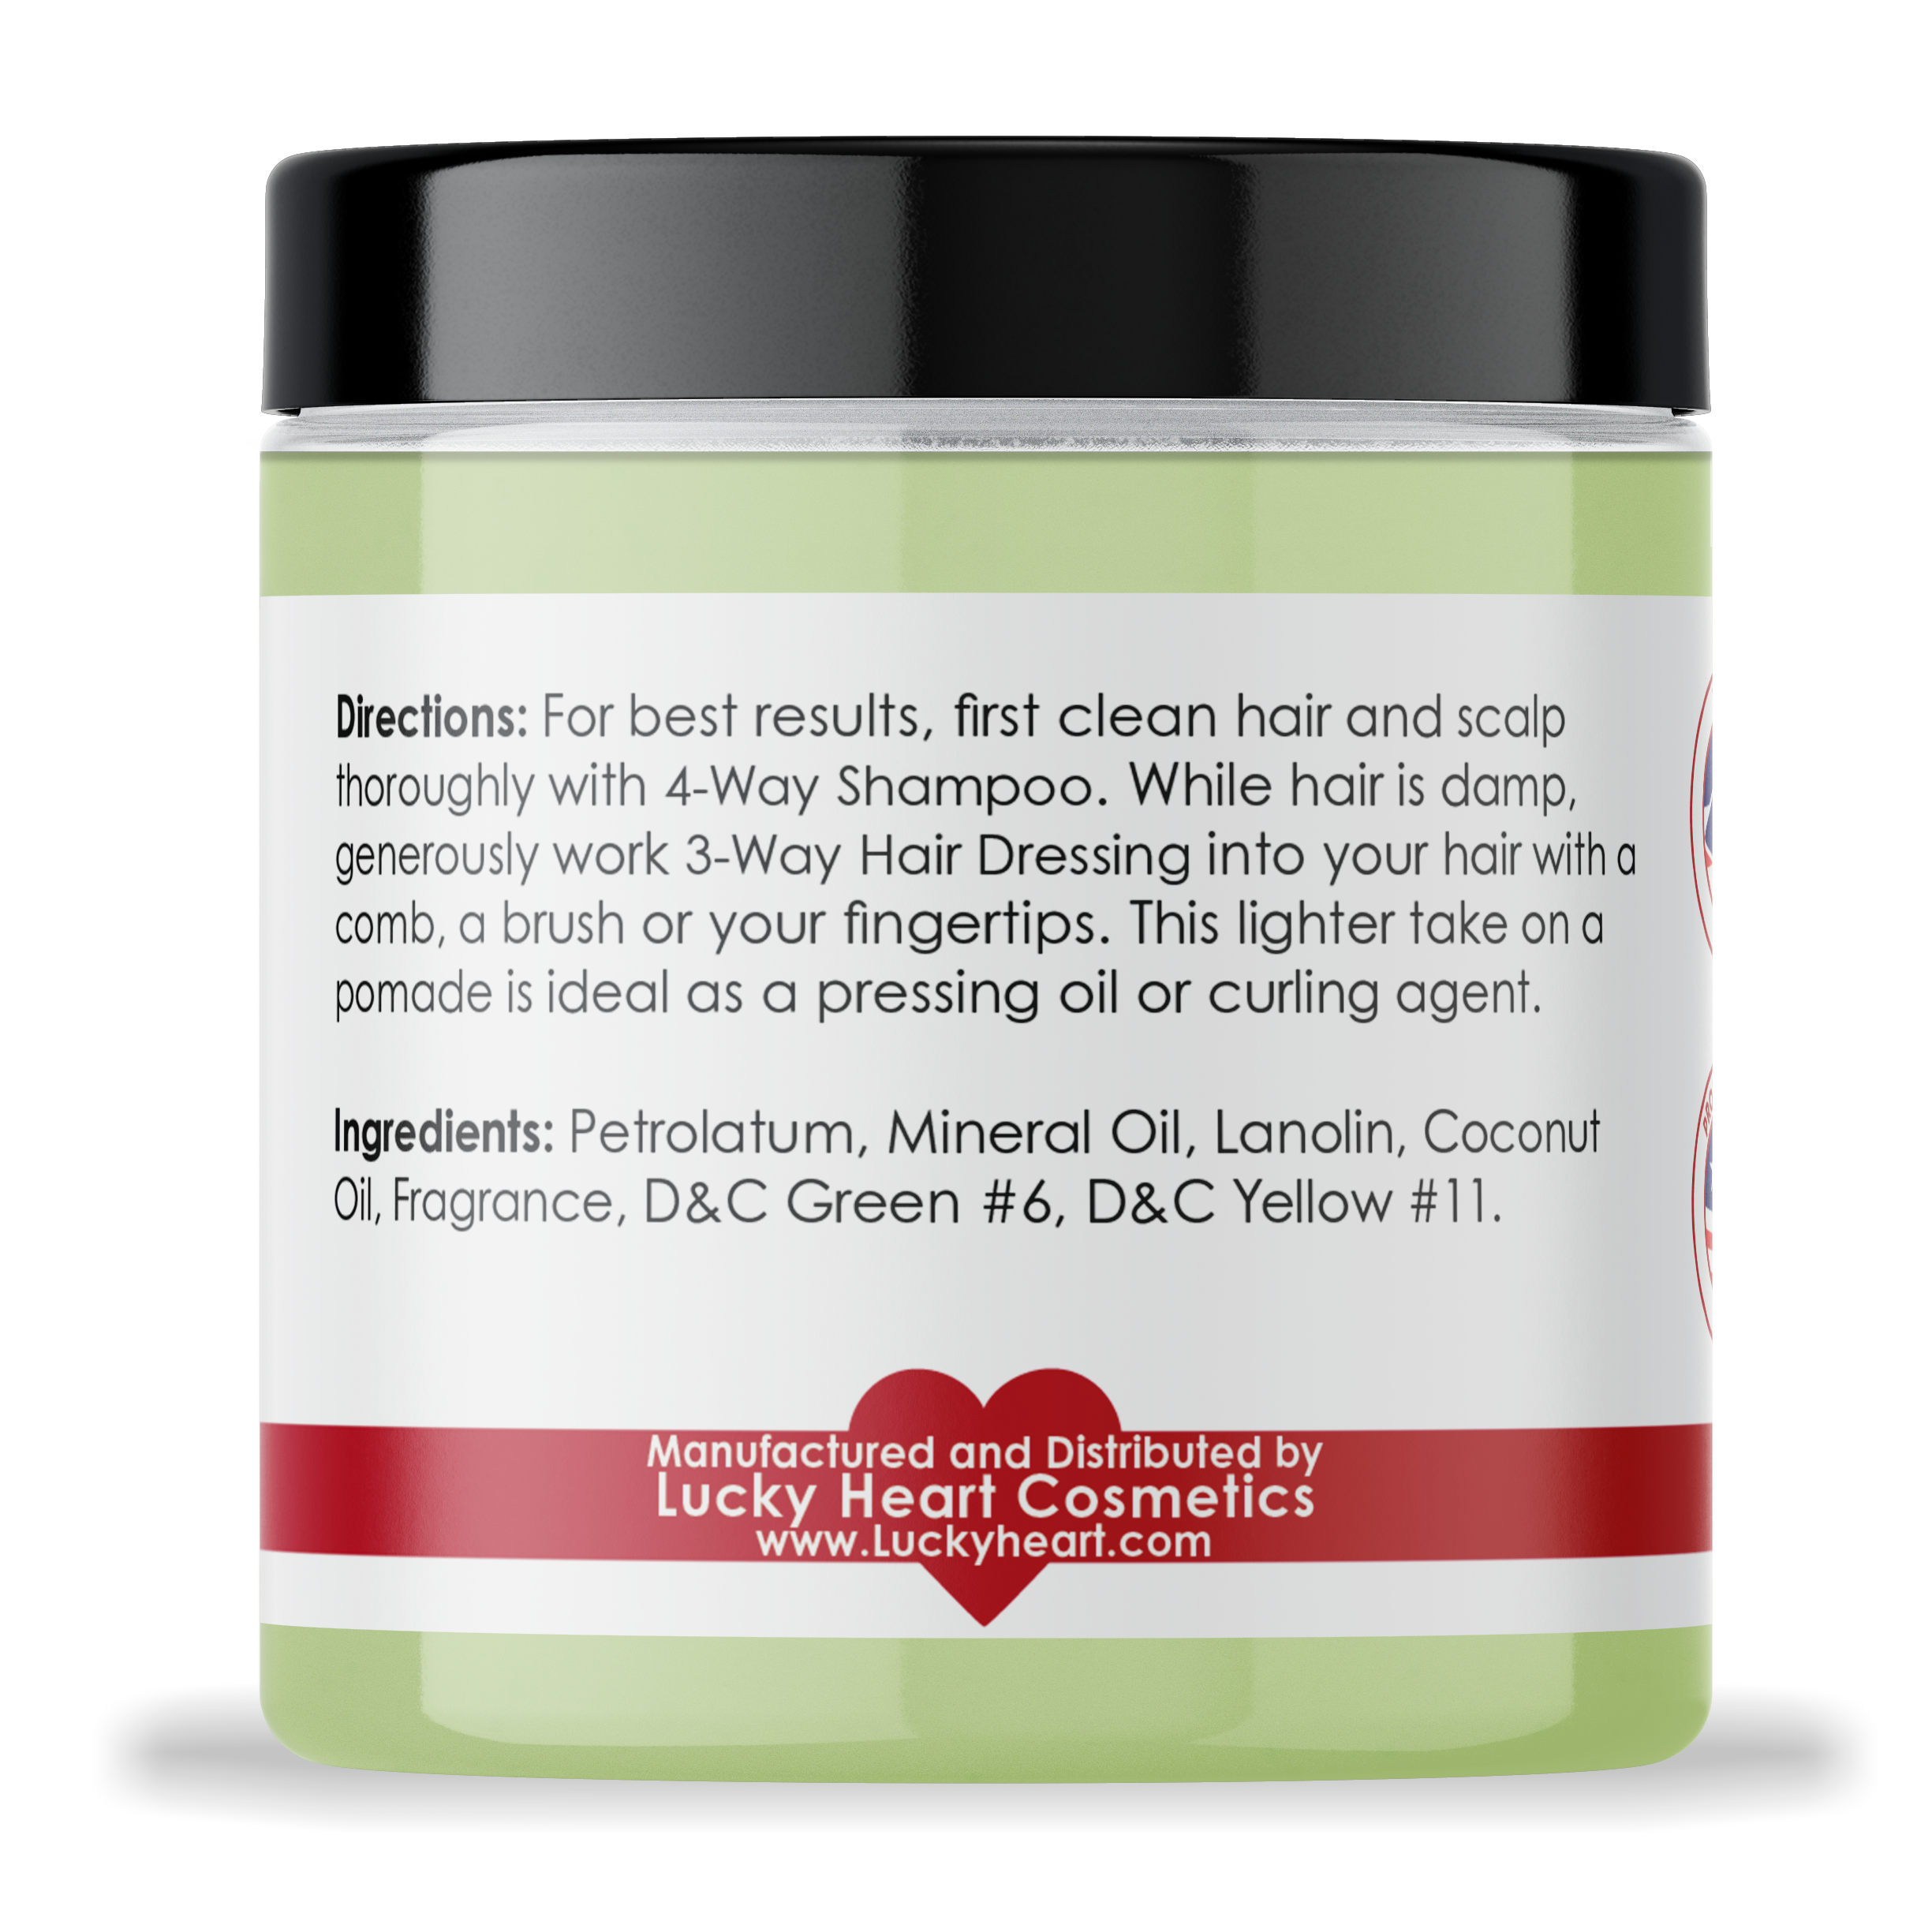 Back label of 3-Way Hair Dressing by Lucky Heart Cosmetics.